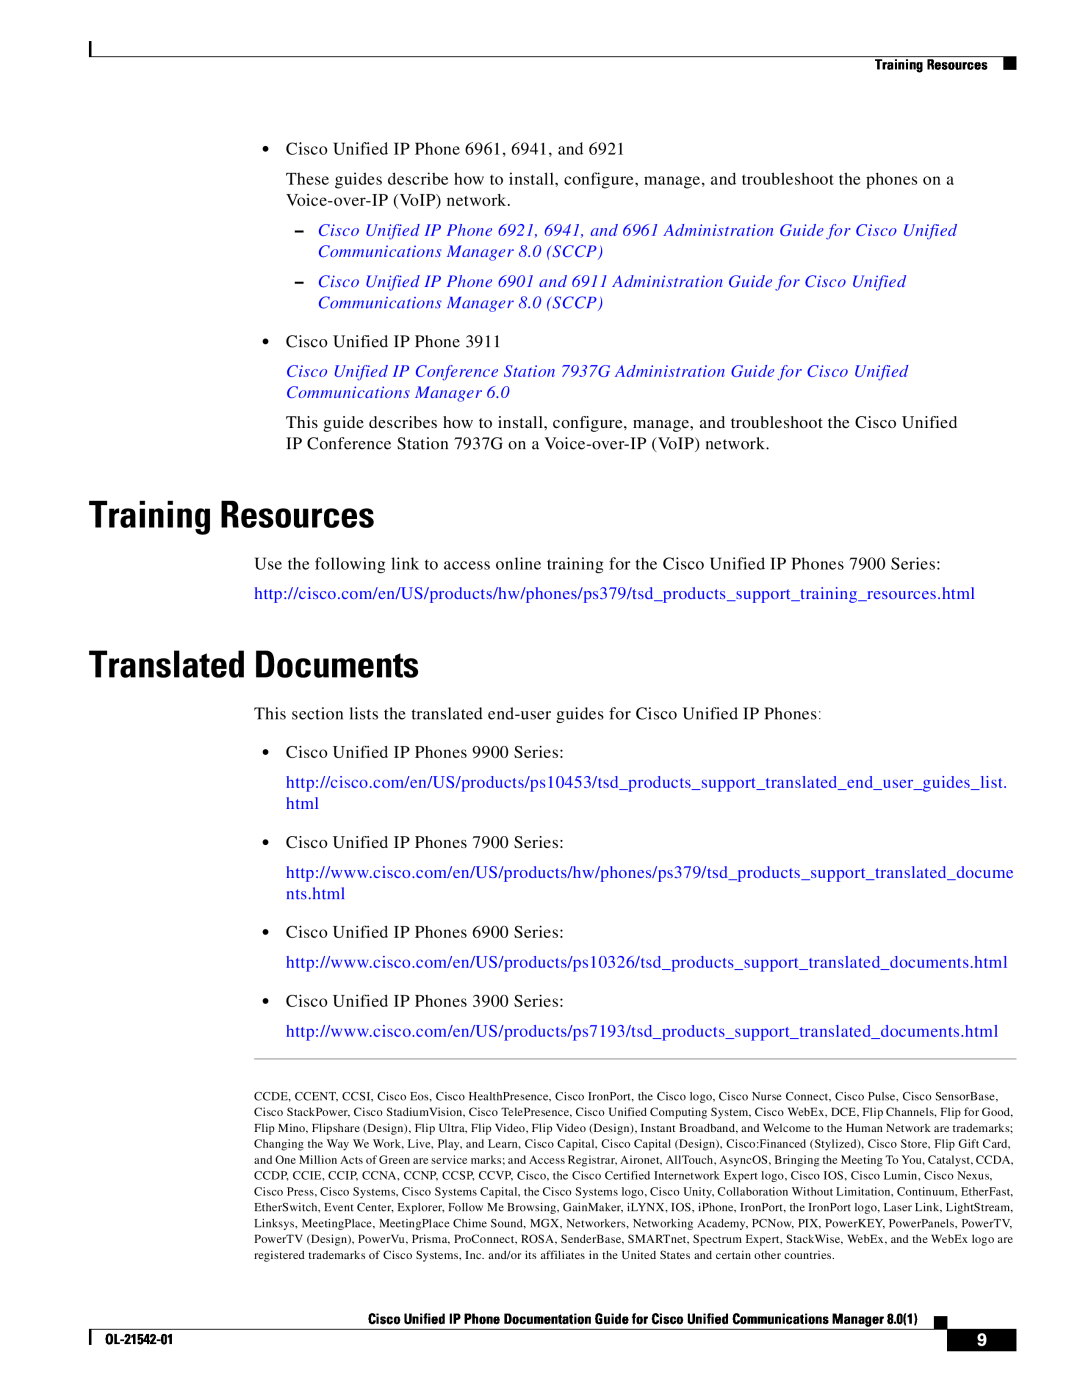 Cisco Systems 3900, 6900, 9900 manual Training Resources, Translated Documents 